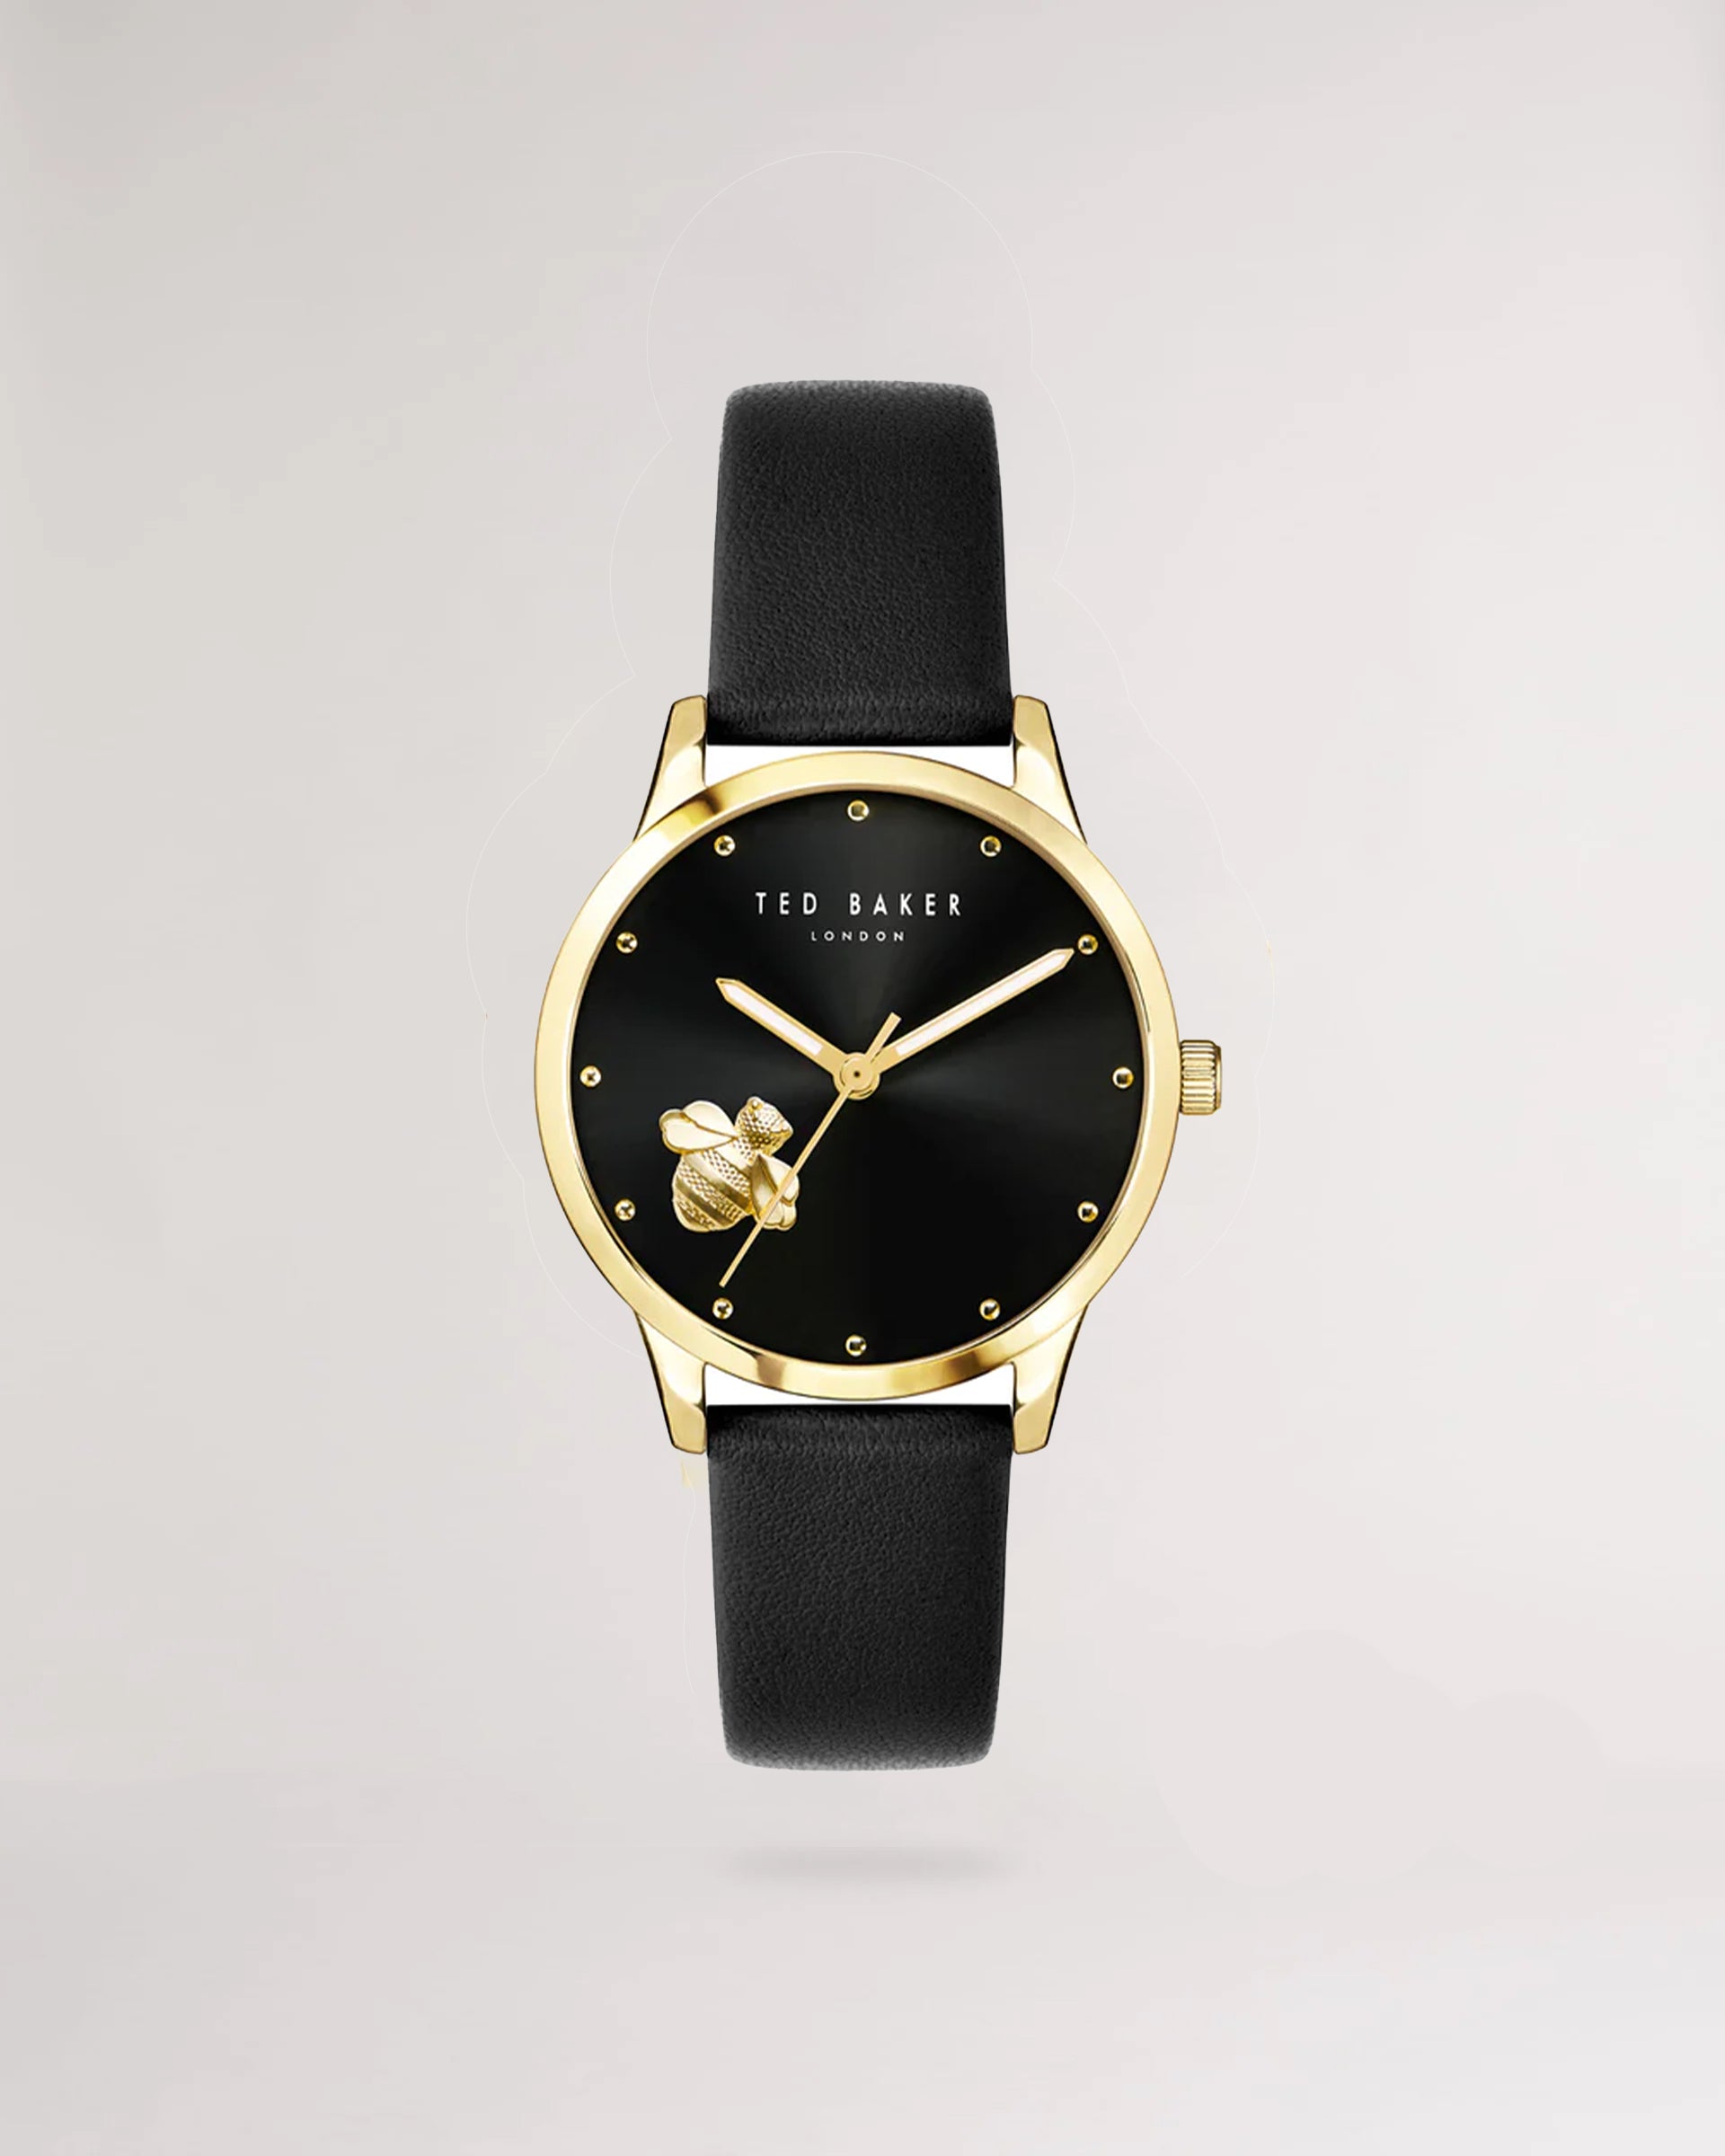 Fitzrovia Bumble Bee Ted Baker Fitzrovia Bumble Bee Ladies Watch